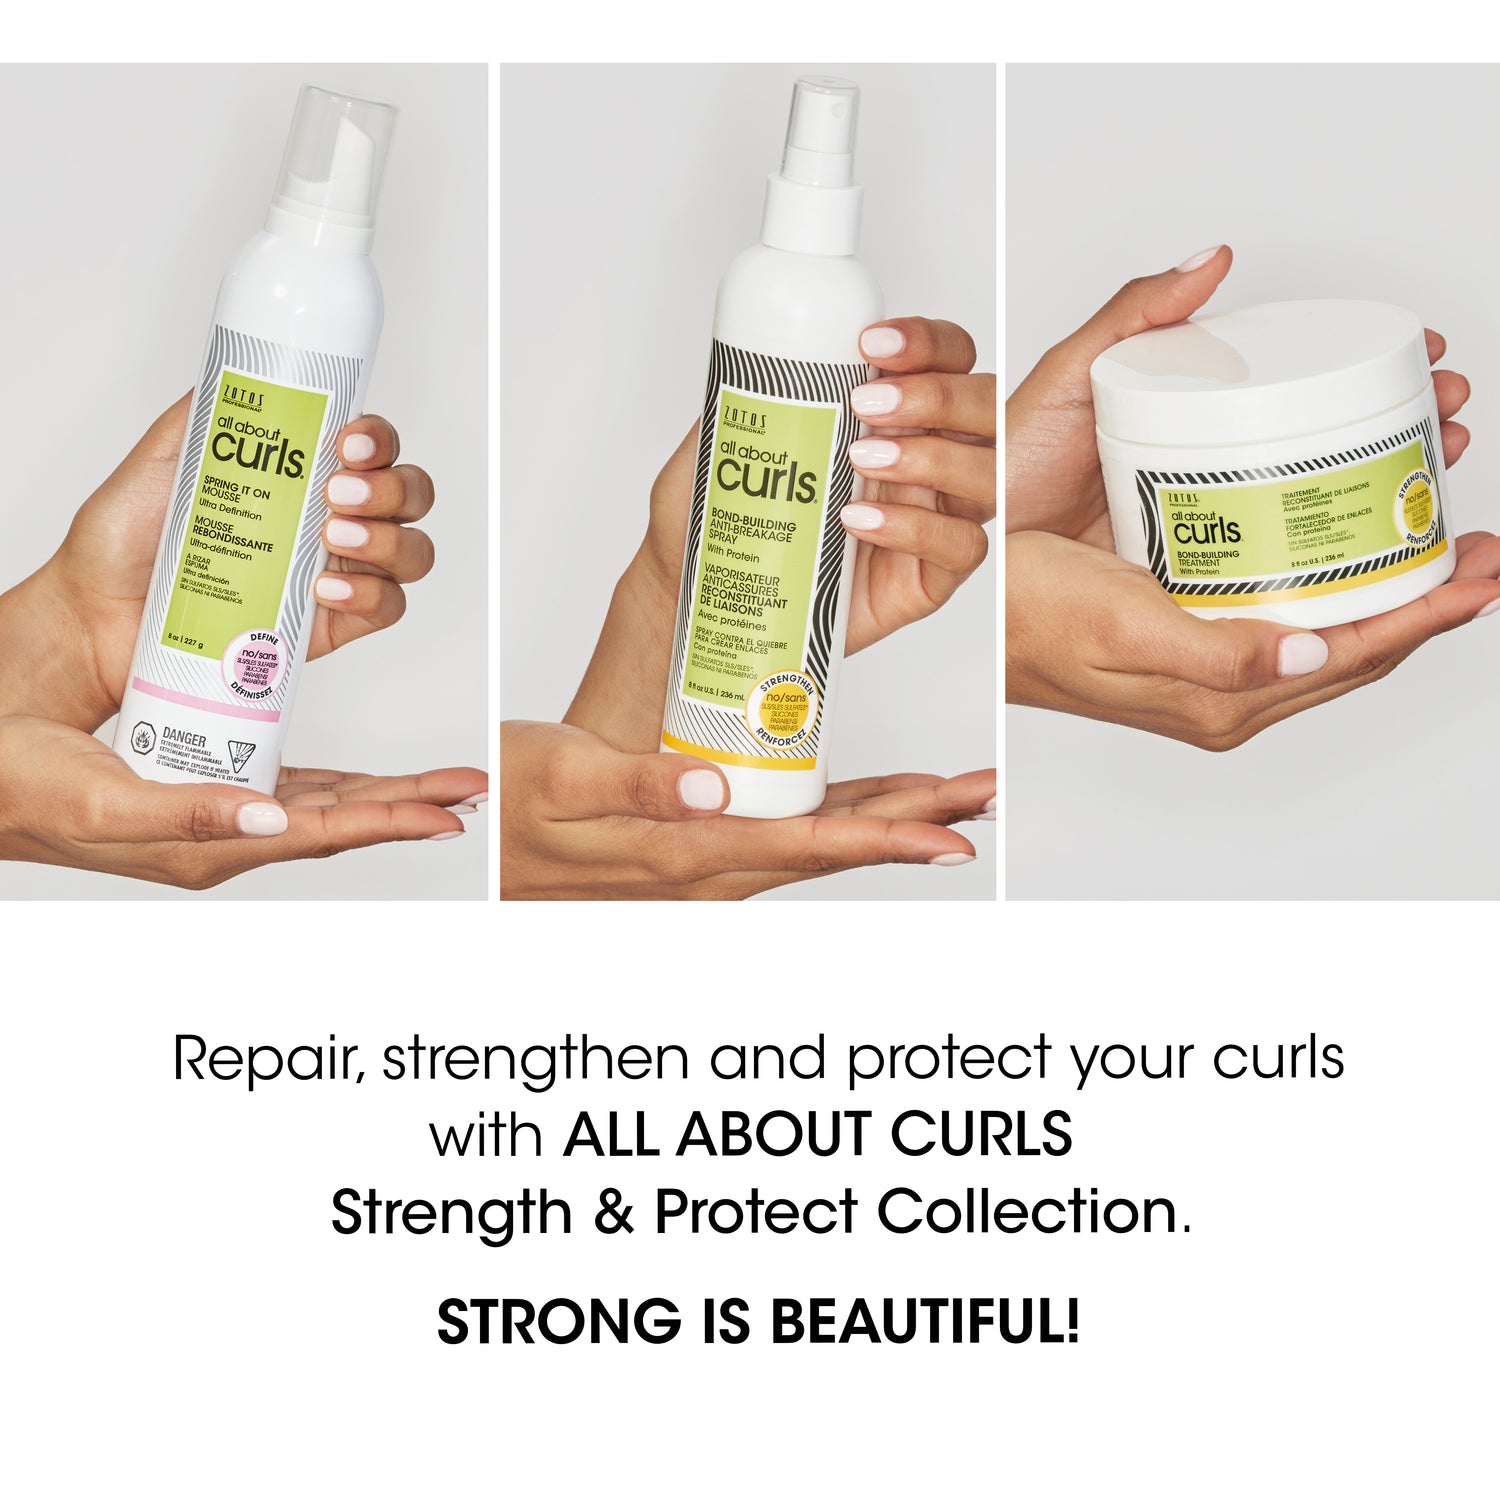 All About Curls® Bond Building Anti-Breakage Spray